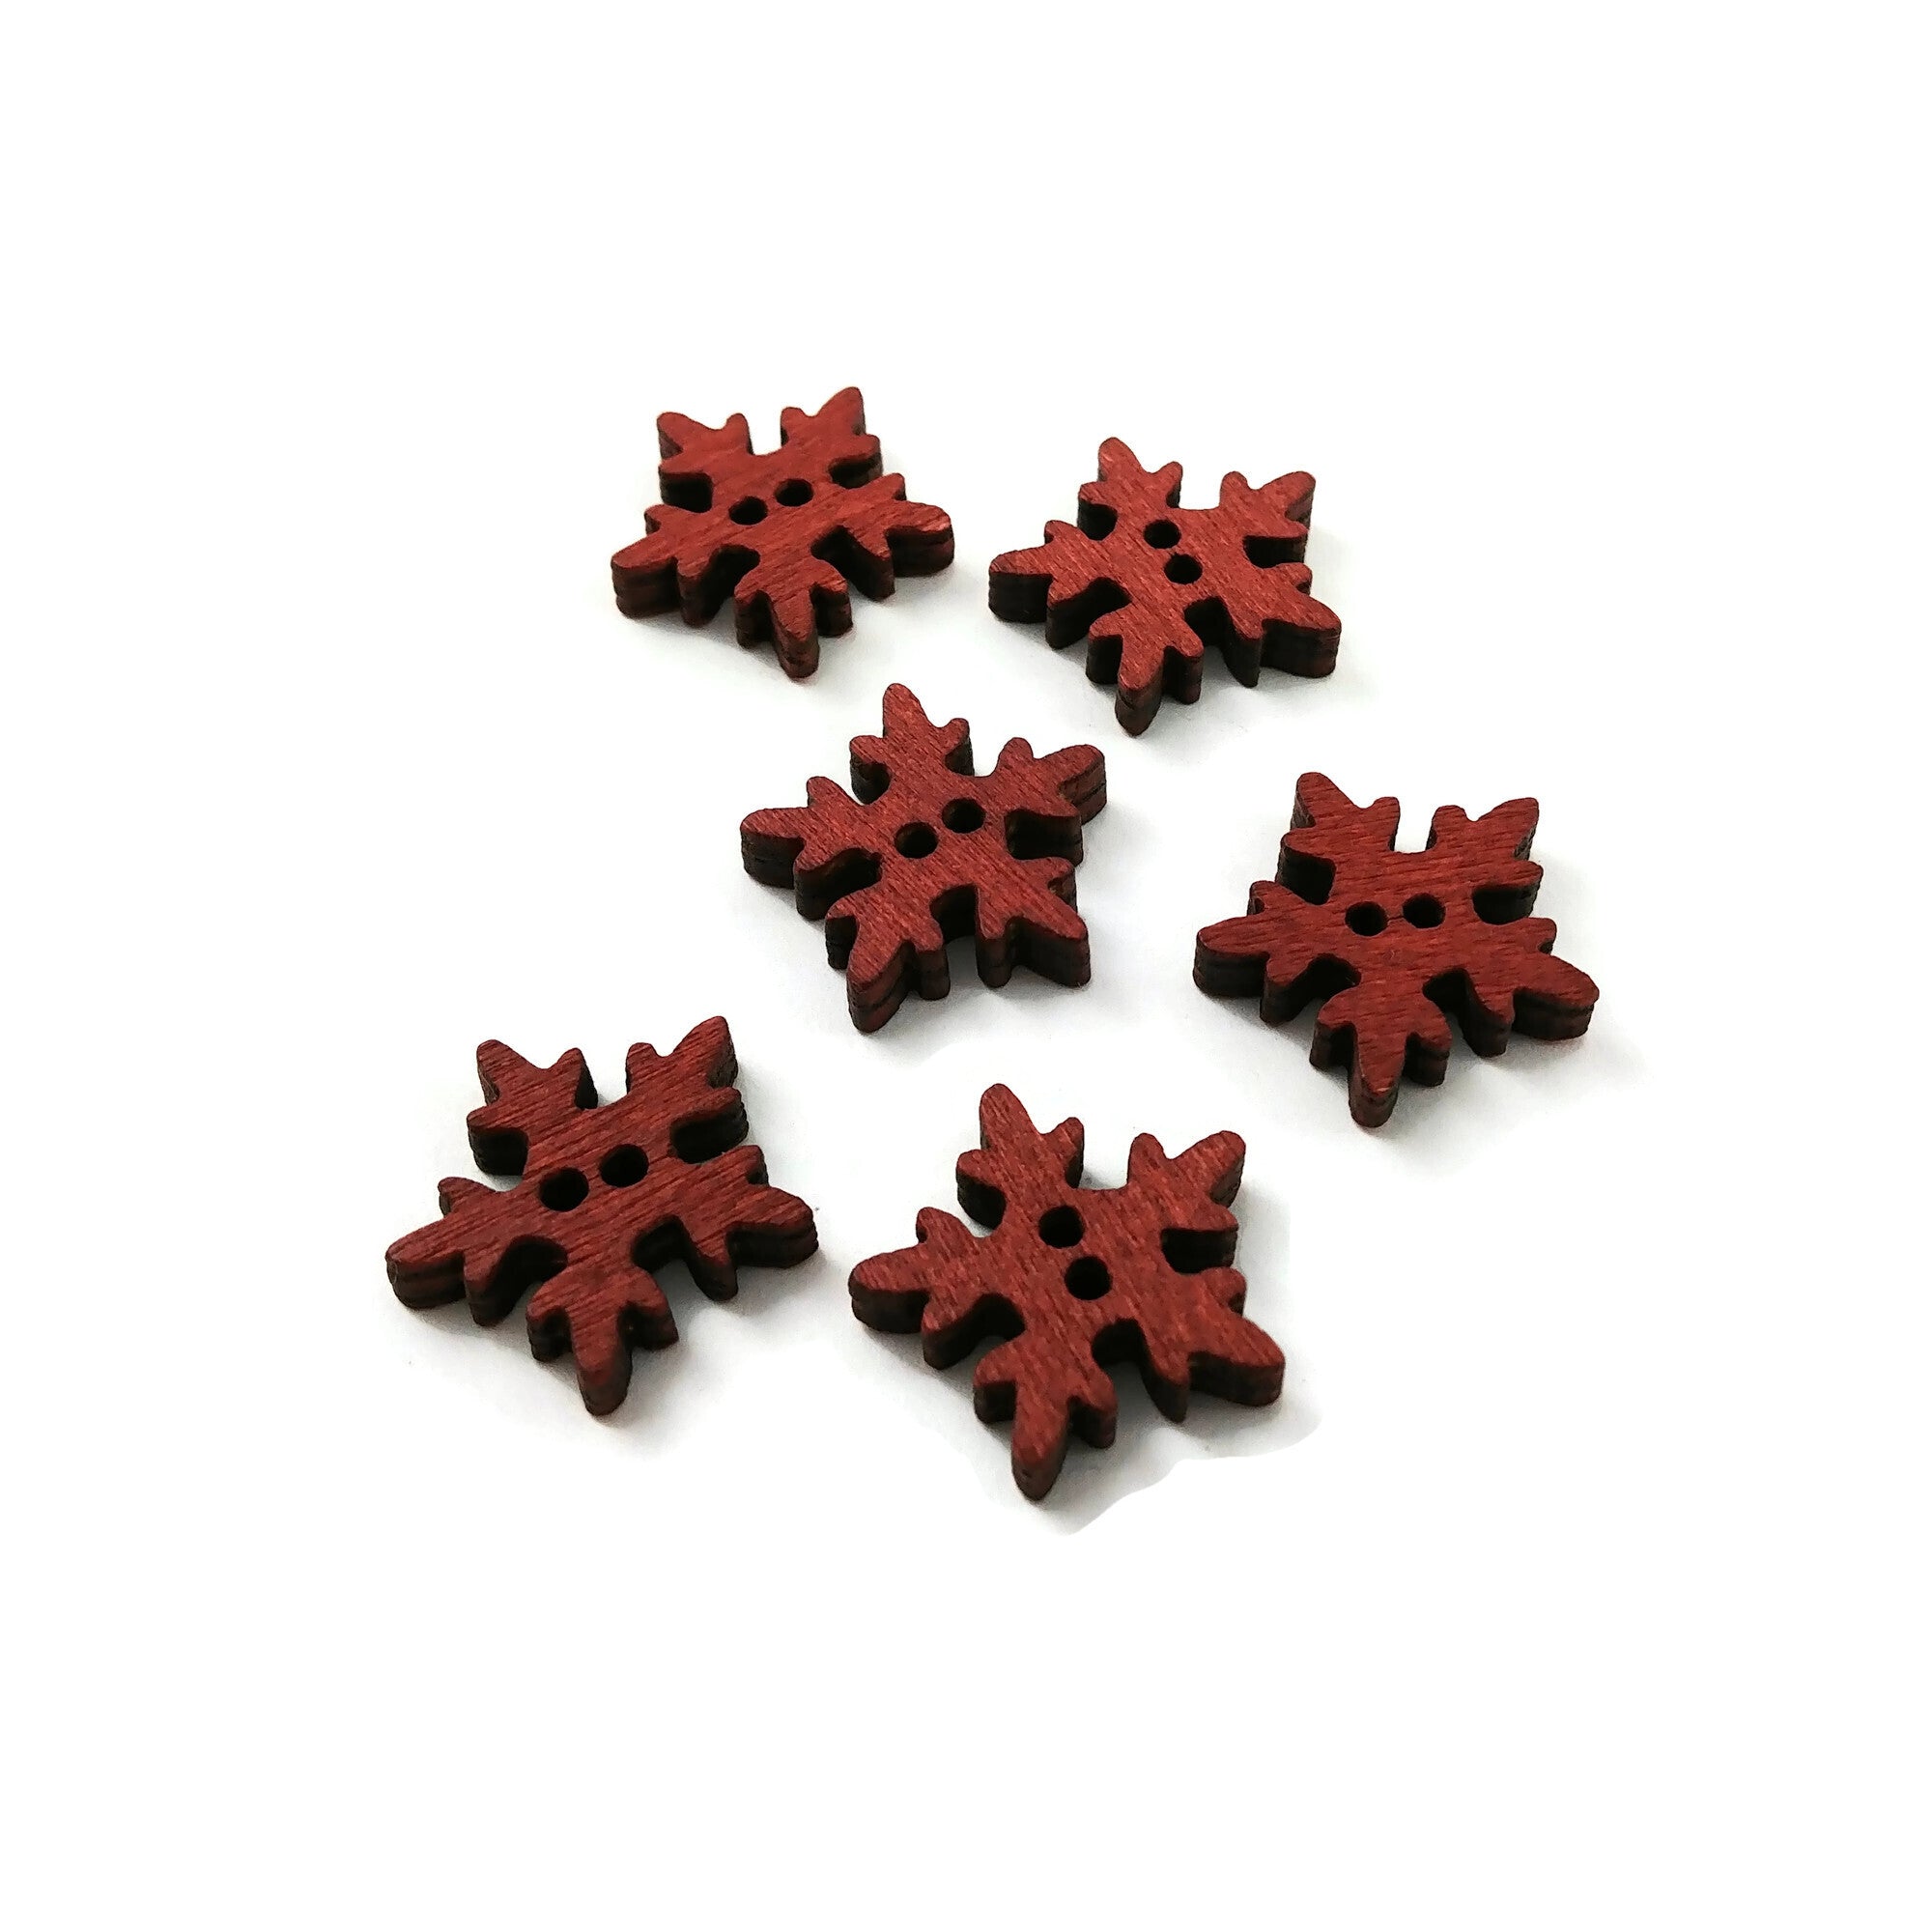 6 Snowflake Wooden Buttons - craft buttons 18mm